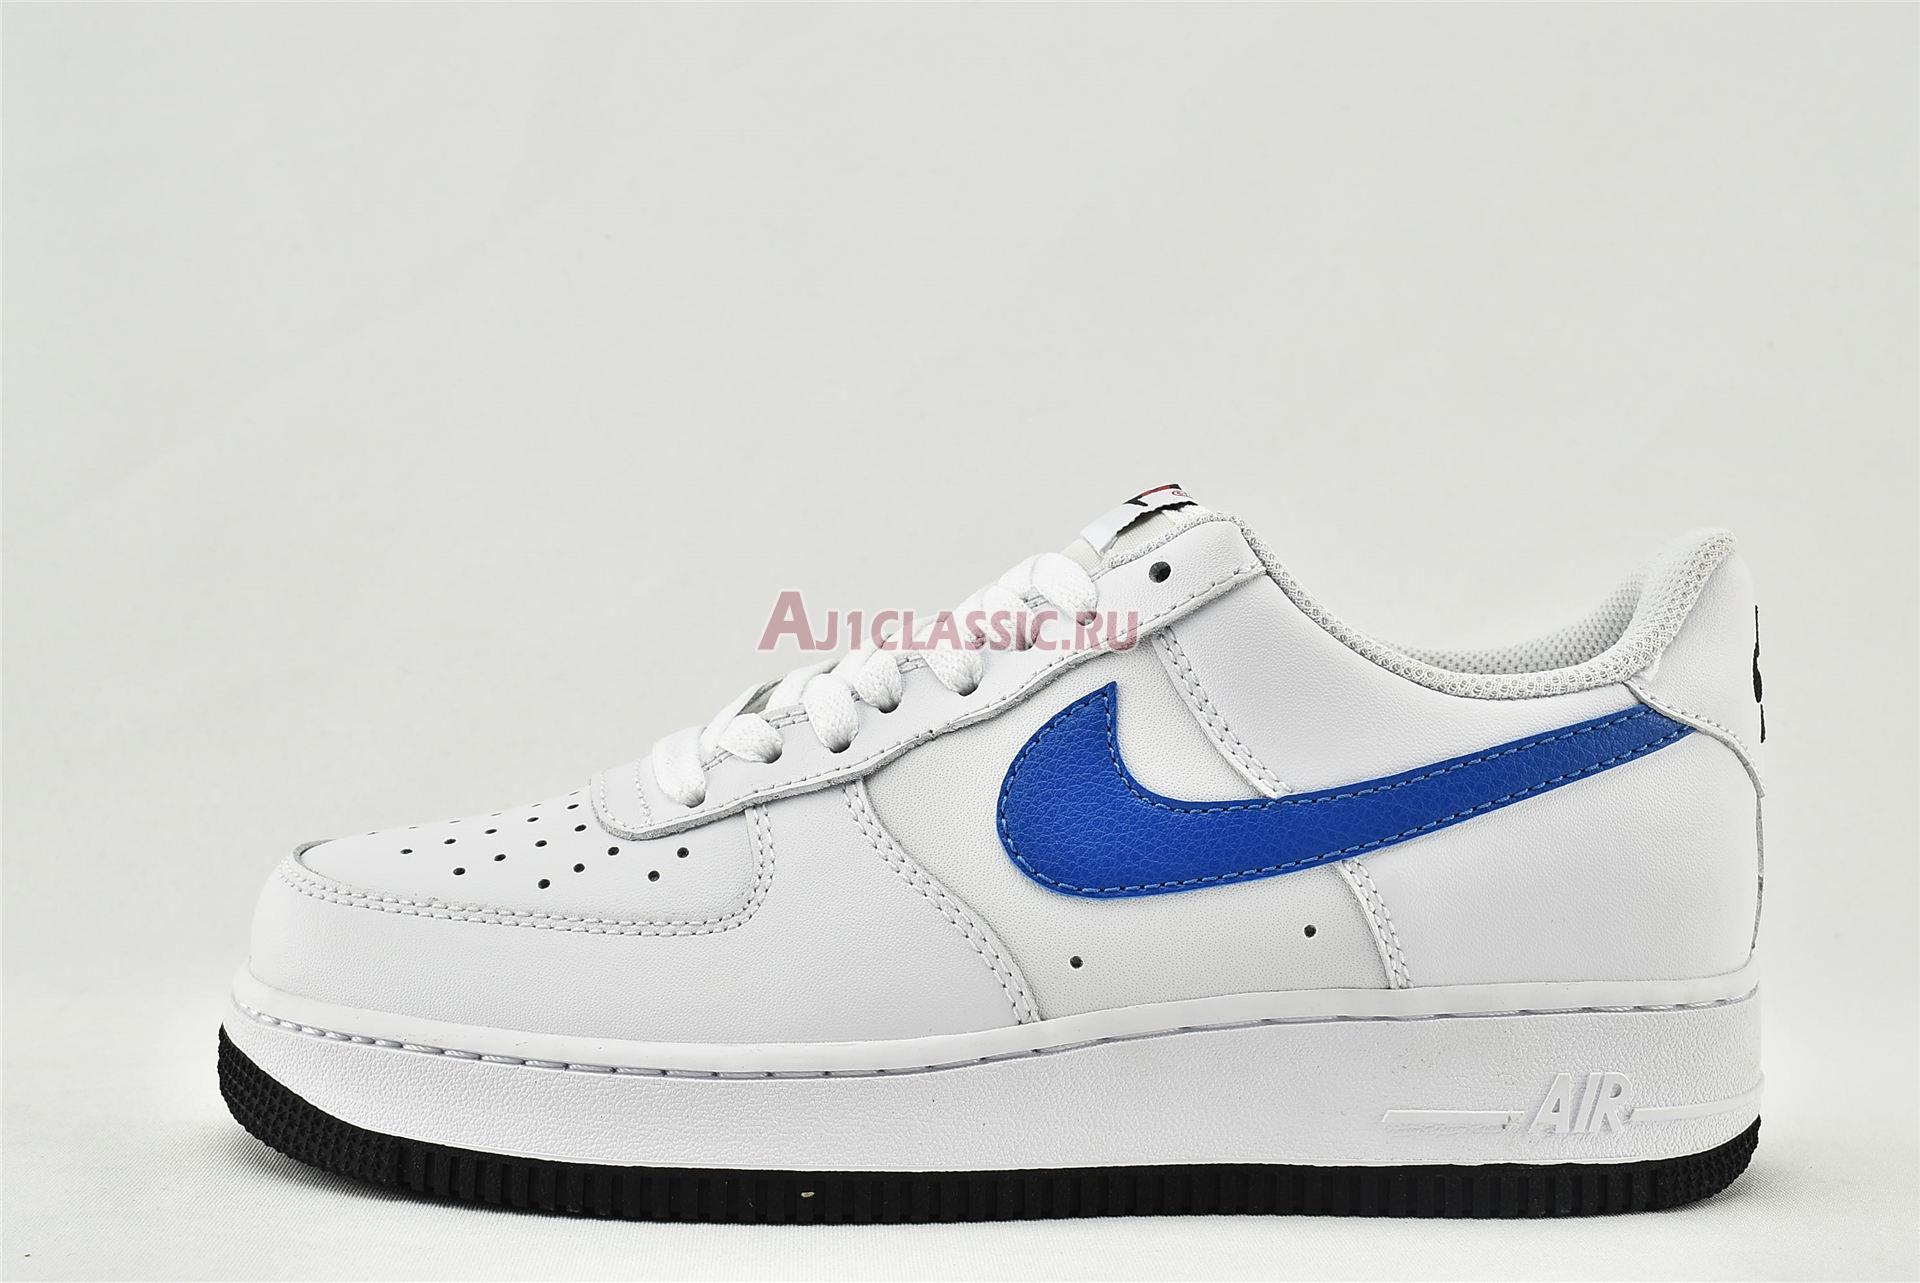 Nike Air Force 1 07 Low "Mismatched Swooshes - White" CT2816-100